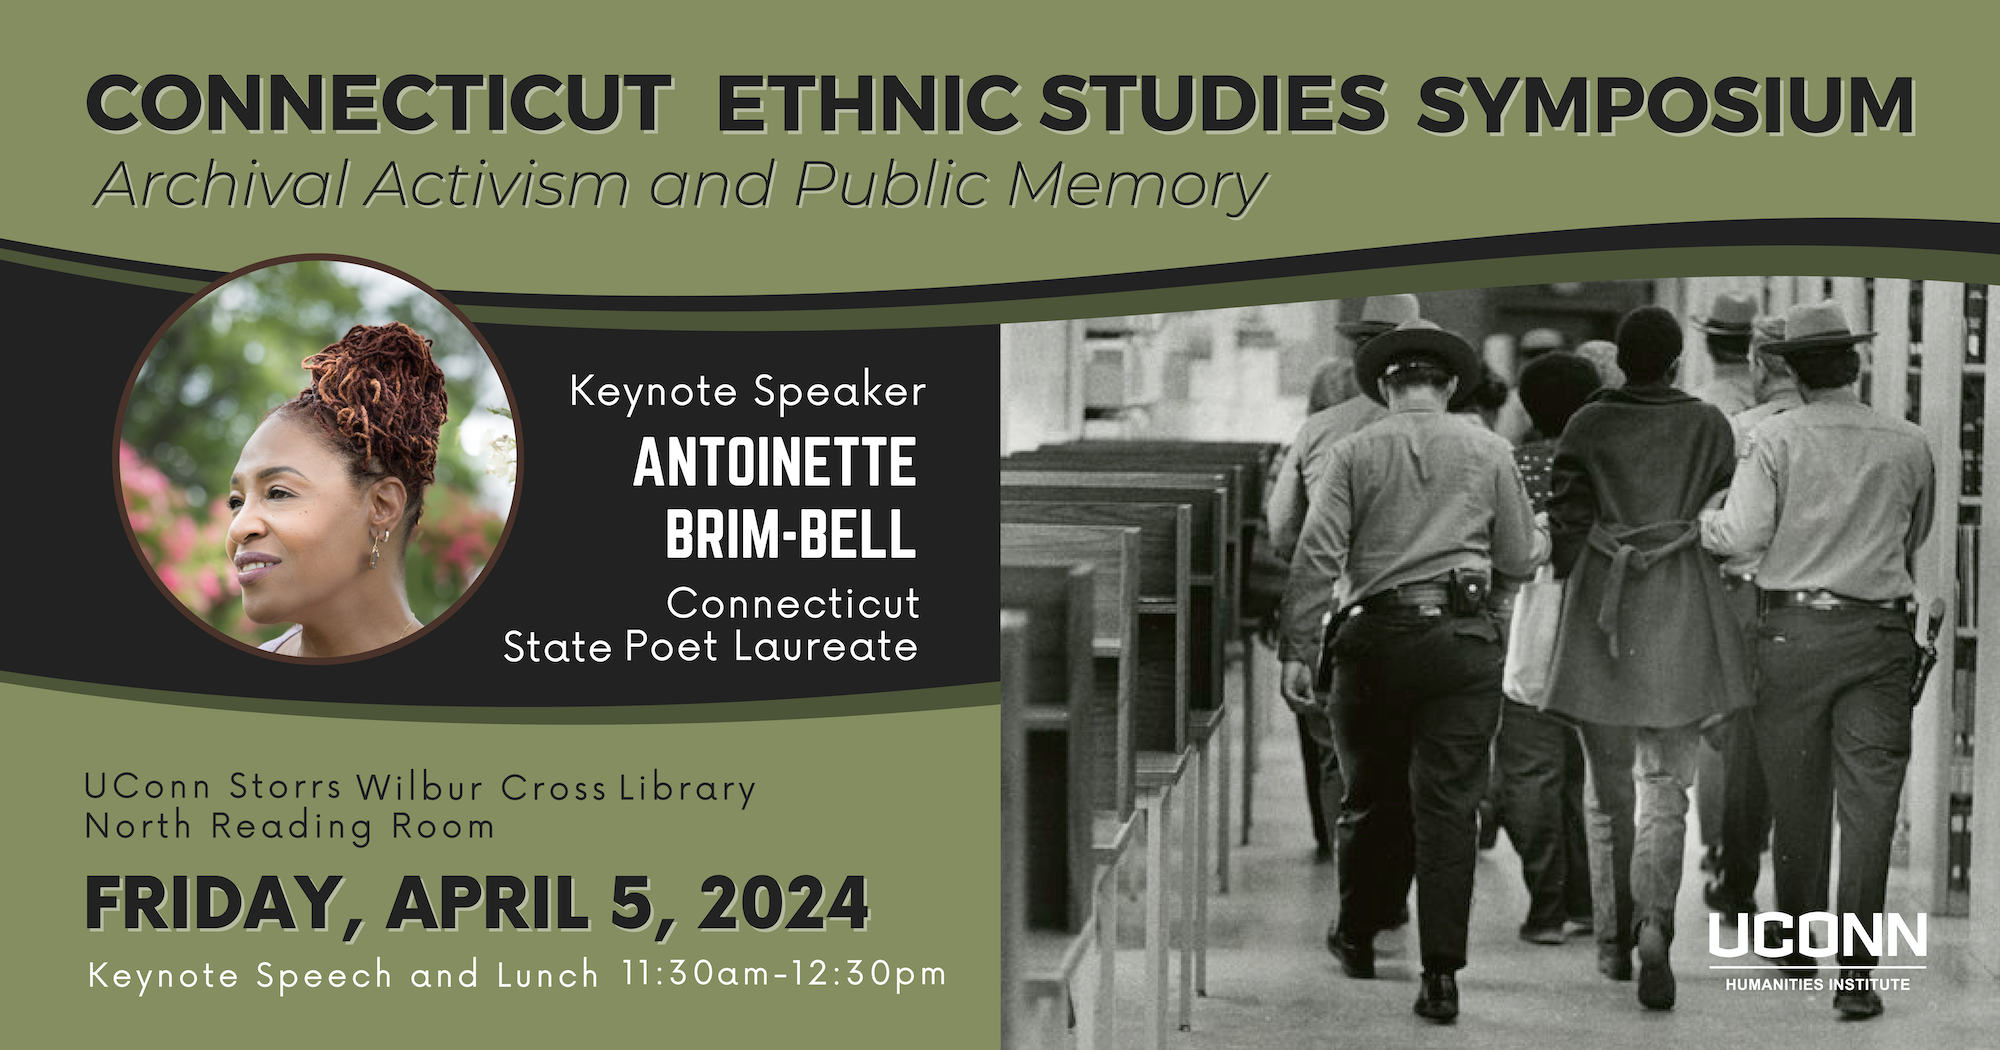 Connecticut Ethnic Studies Symposium. "Archival Activism and Public Memory." Keynote Speaker Antoinette Brim-Bell, Connecticut Poet Laureate. UConn Storrs Wilbur Cross, North Reading Room. Friday April 5, 2024. Keynote speech and lunch, 11:30am–12:30pm.